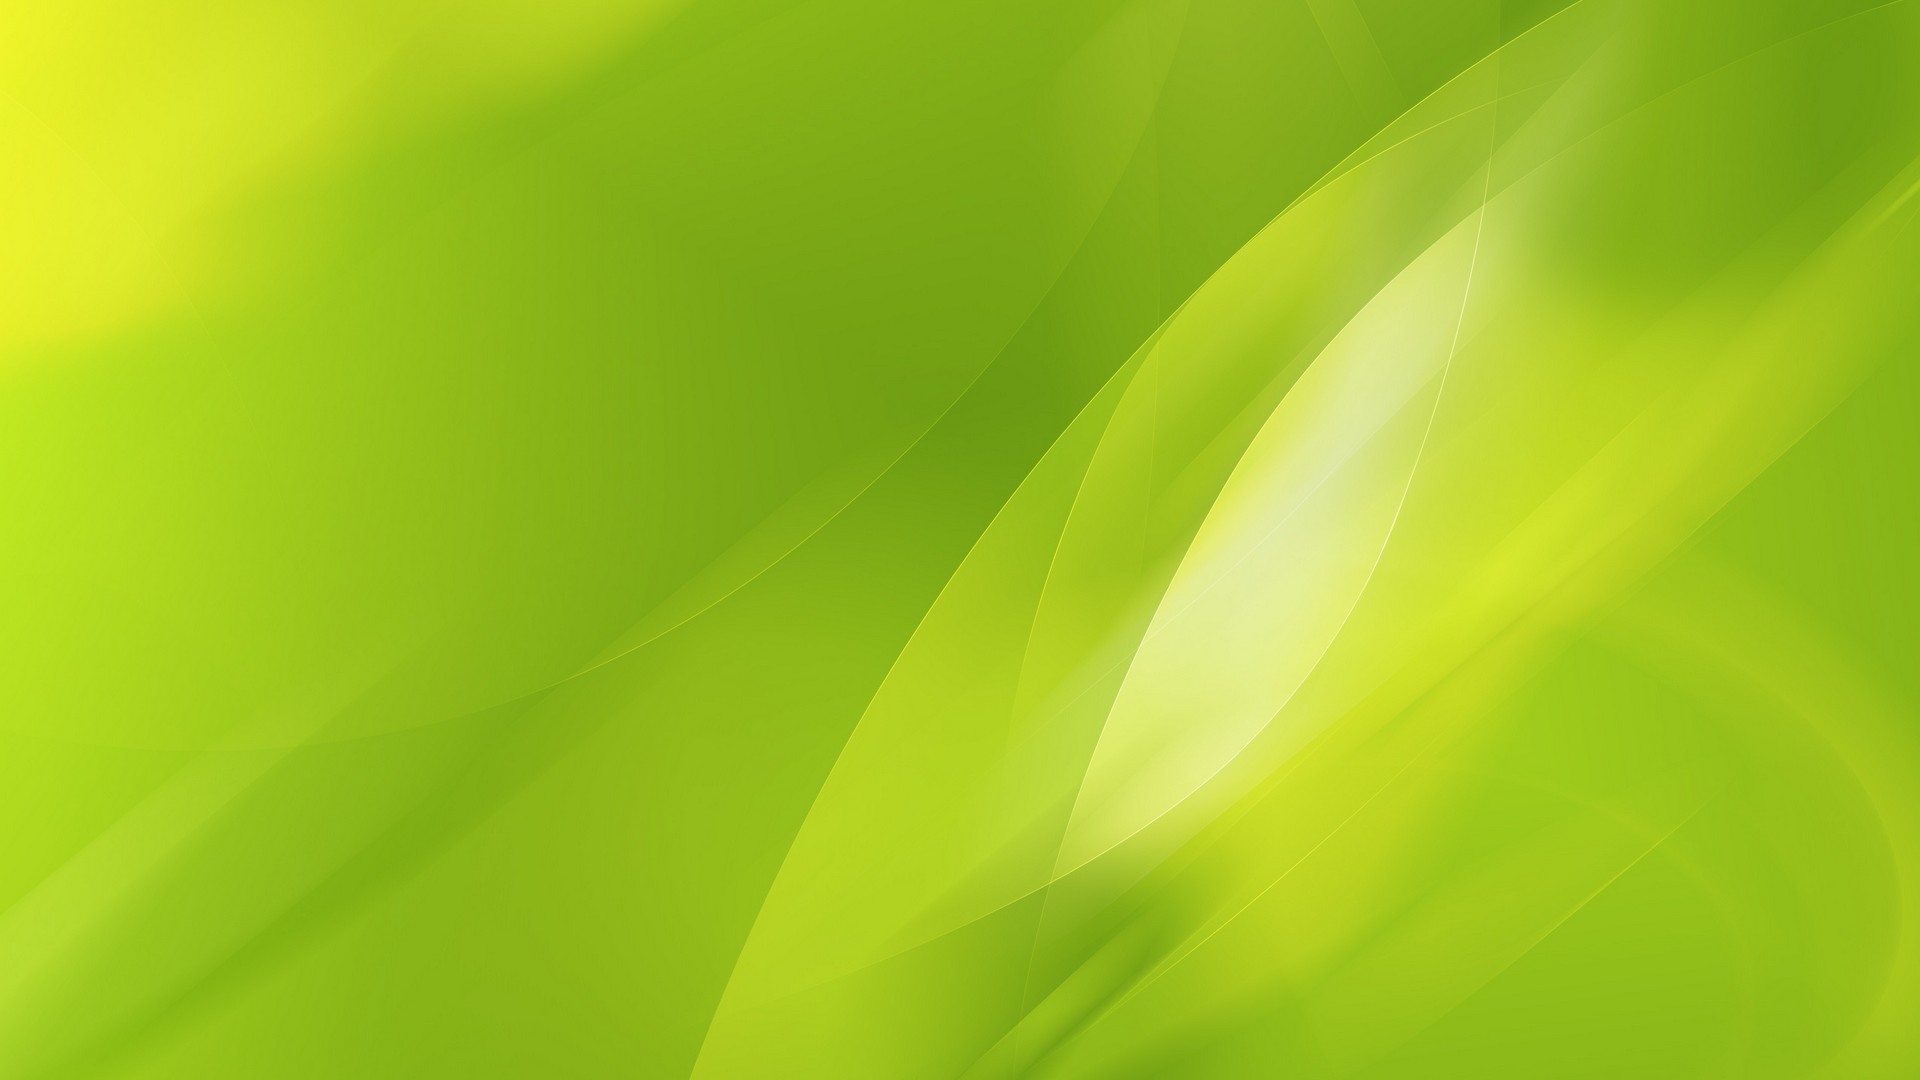 Wallpapers Computer Lime Green With Resolution 1920X1080 pixel. You can make this wallpaper for your Desktop Computer Backgrounds, Mac Wallpapers, Android Lock screen or iPhone Screensavers